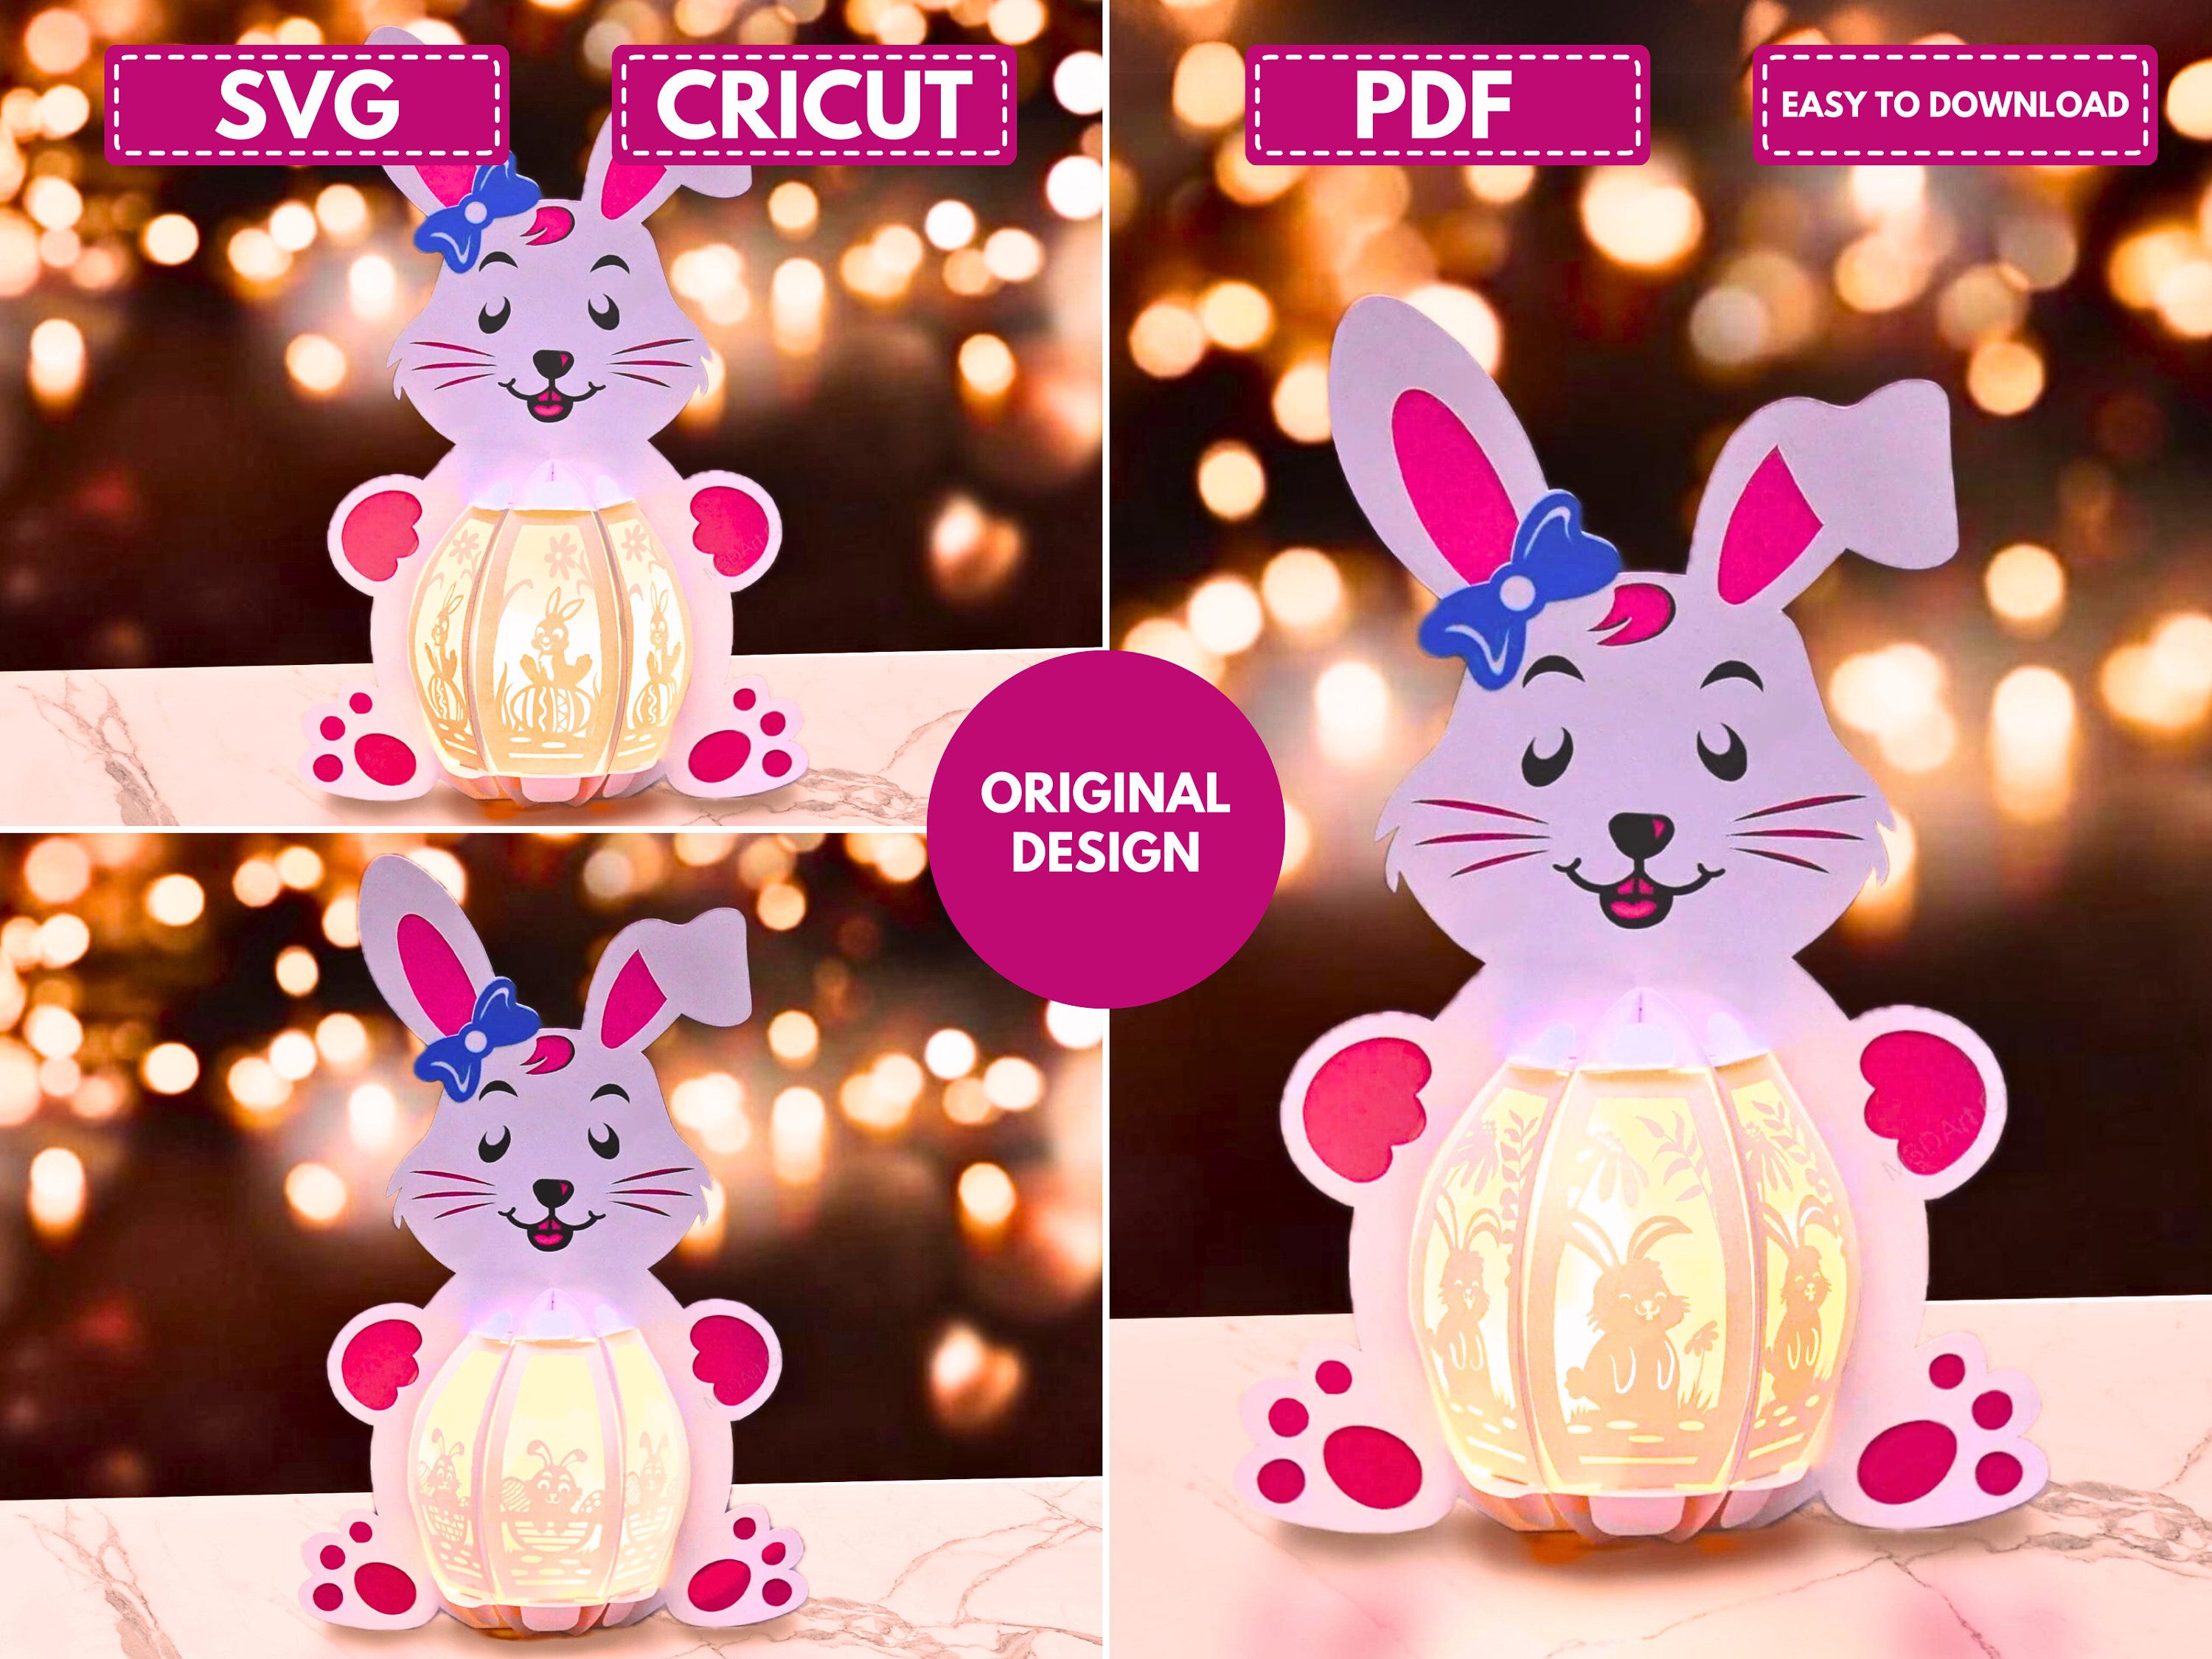 Pack 3 Cute Bunny Easter Lanterns PDF, SVG Light Box for Cricut Projects, Cameo4, ScanNcut, Easter Sphere Popup, DIY Lantern with Rabbit